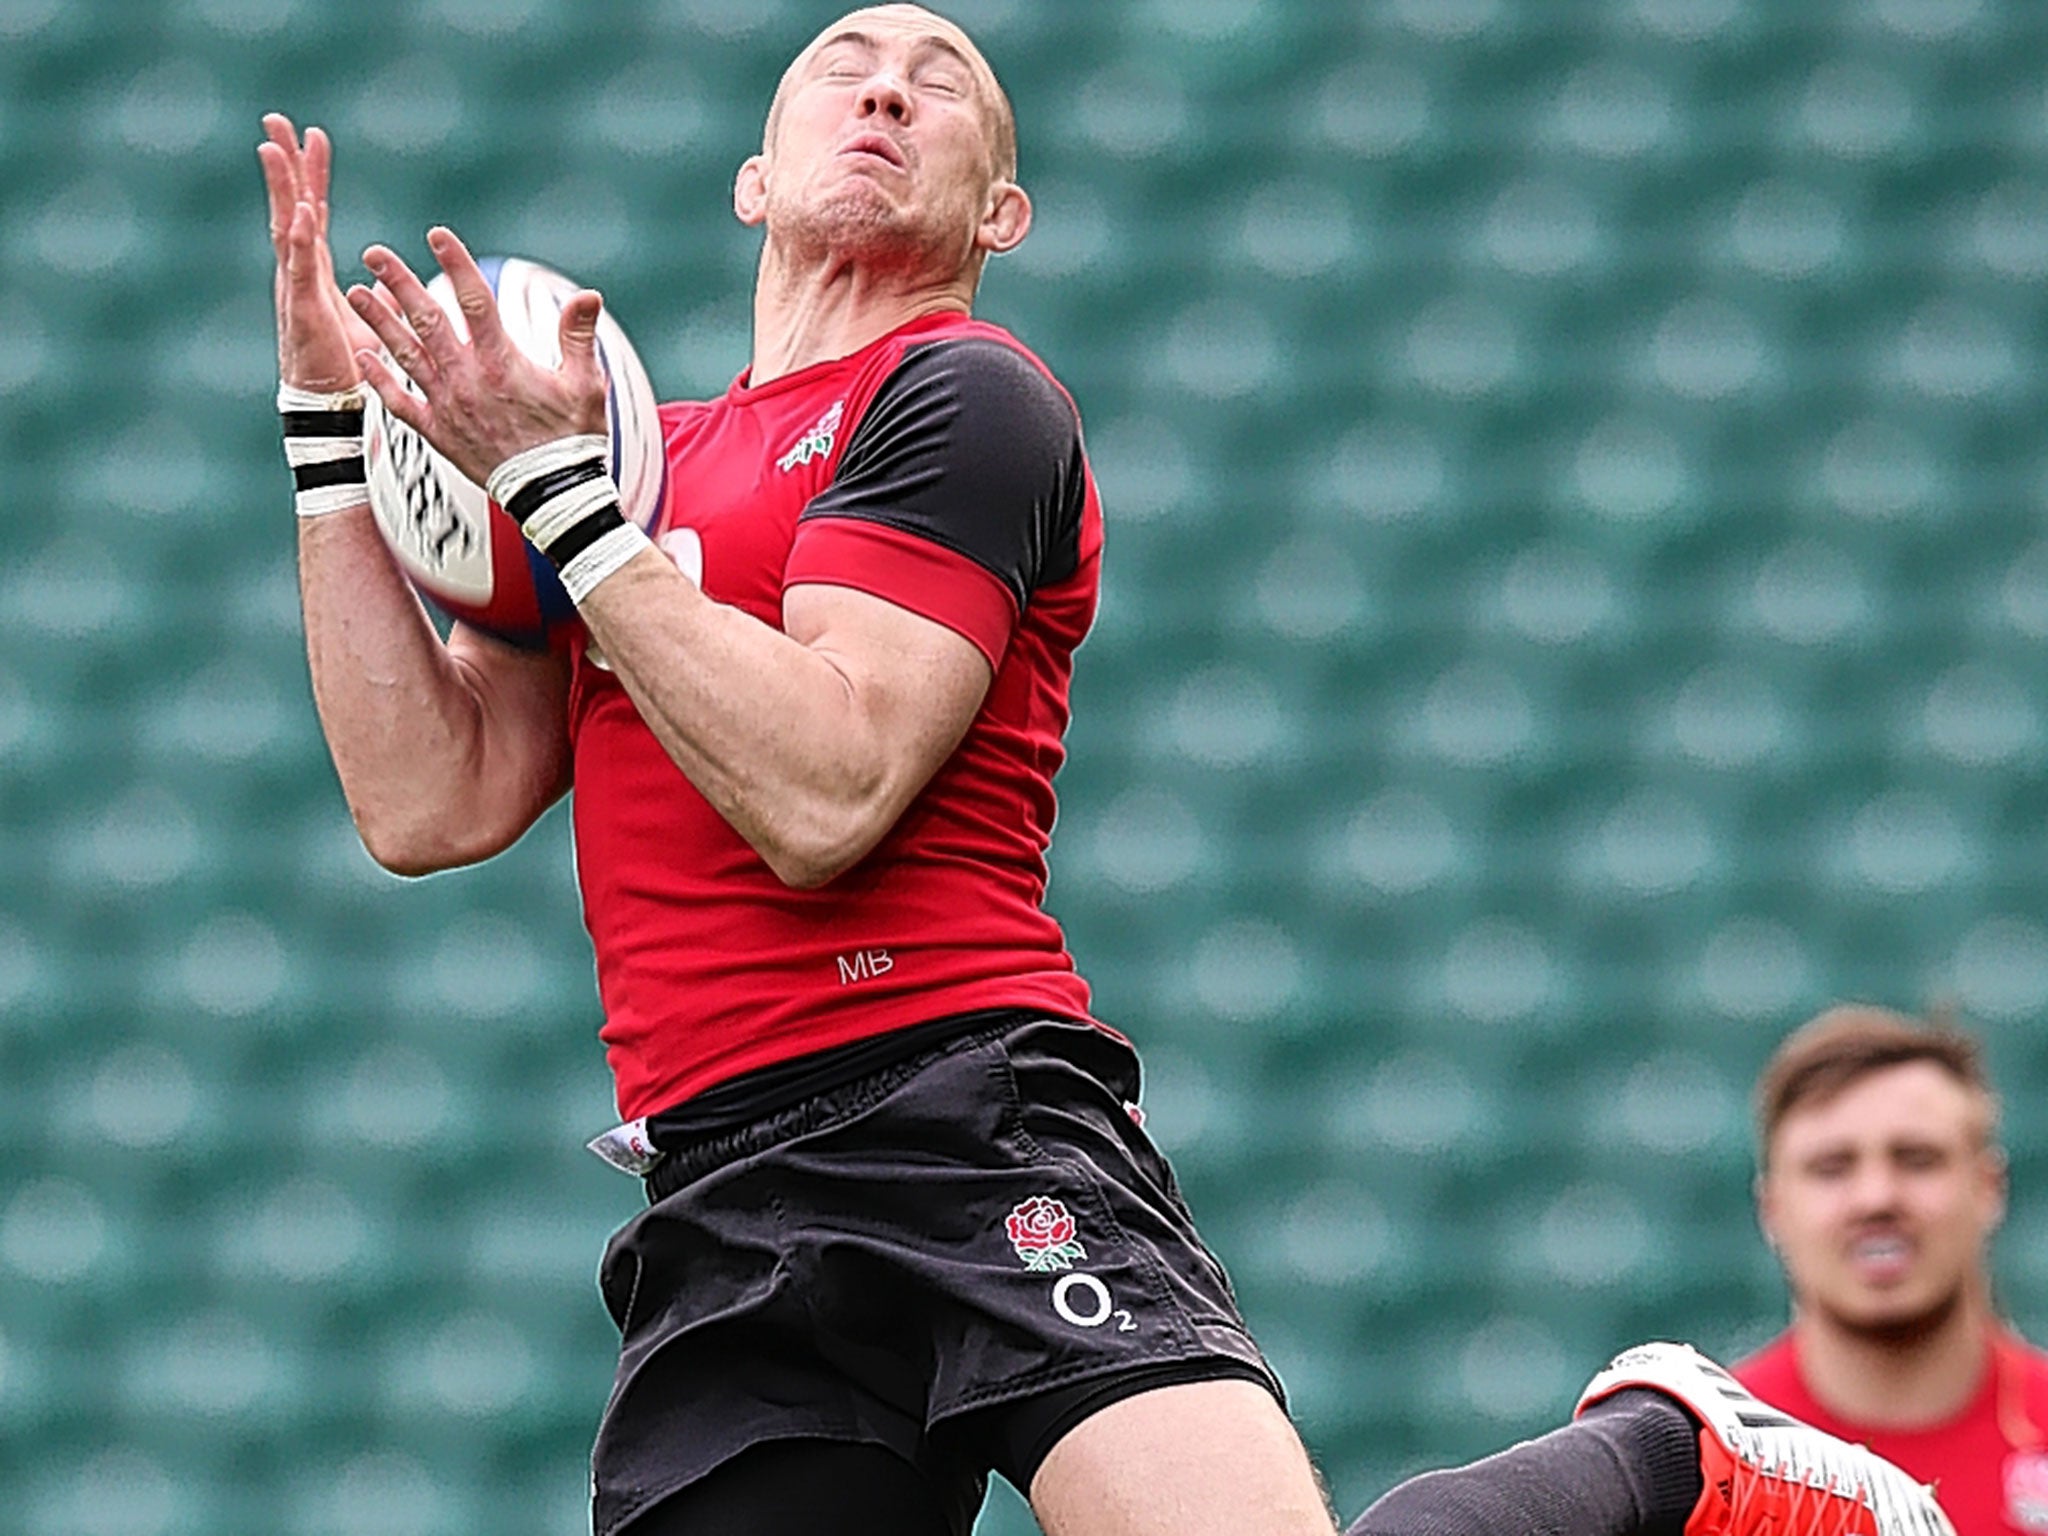 Full-back Mike Brown in training with the England squad at Twickenham on Friday